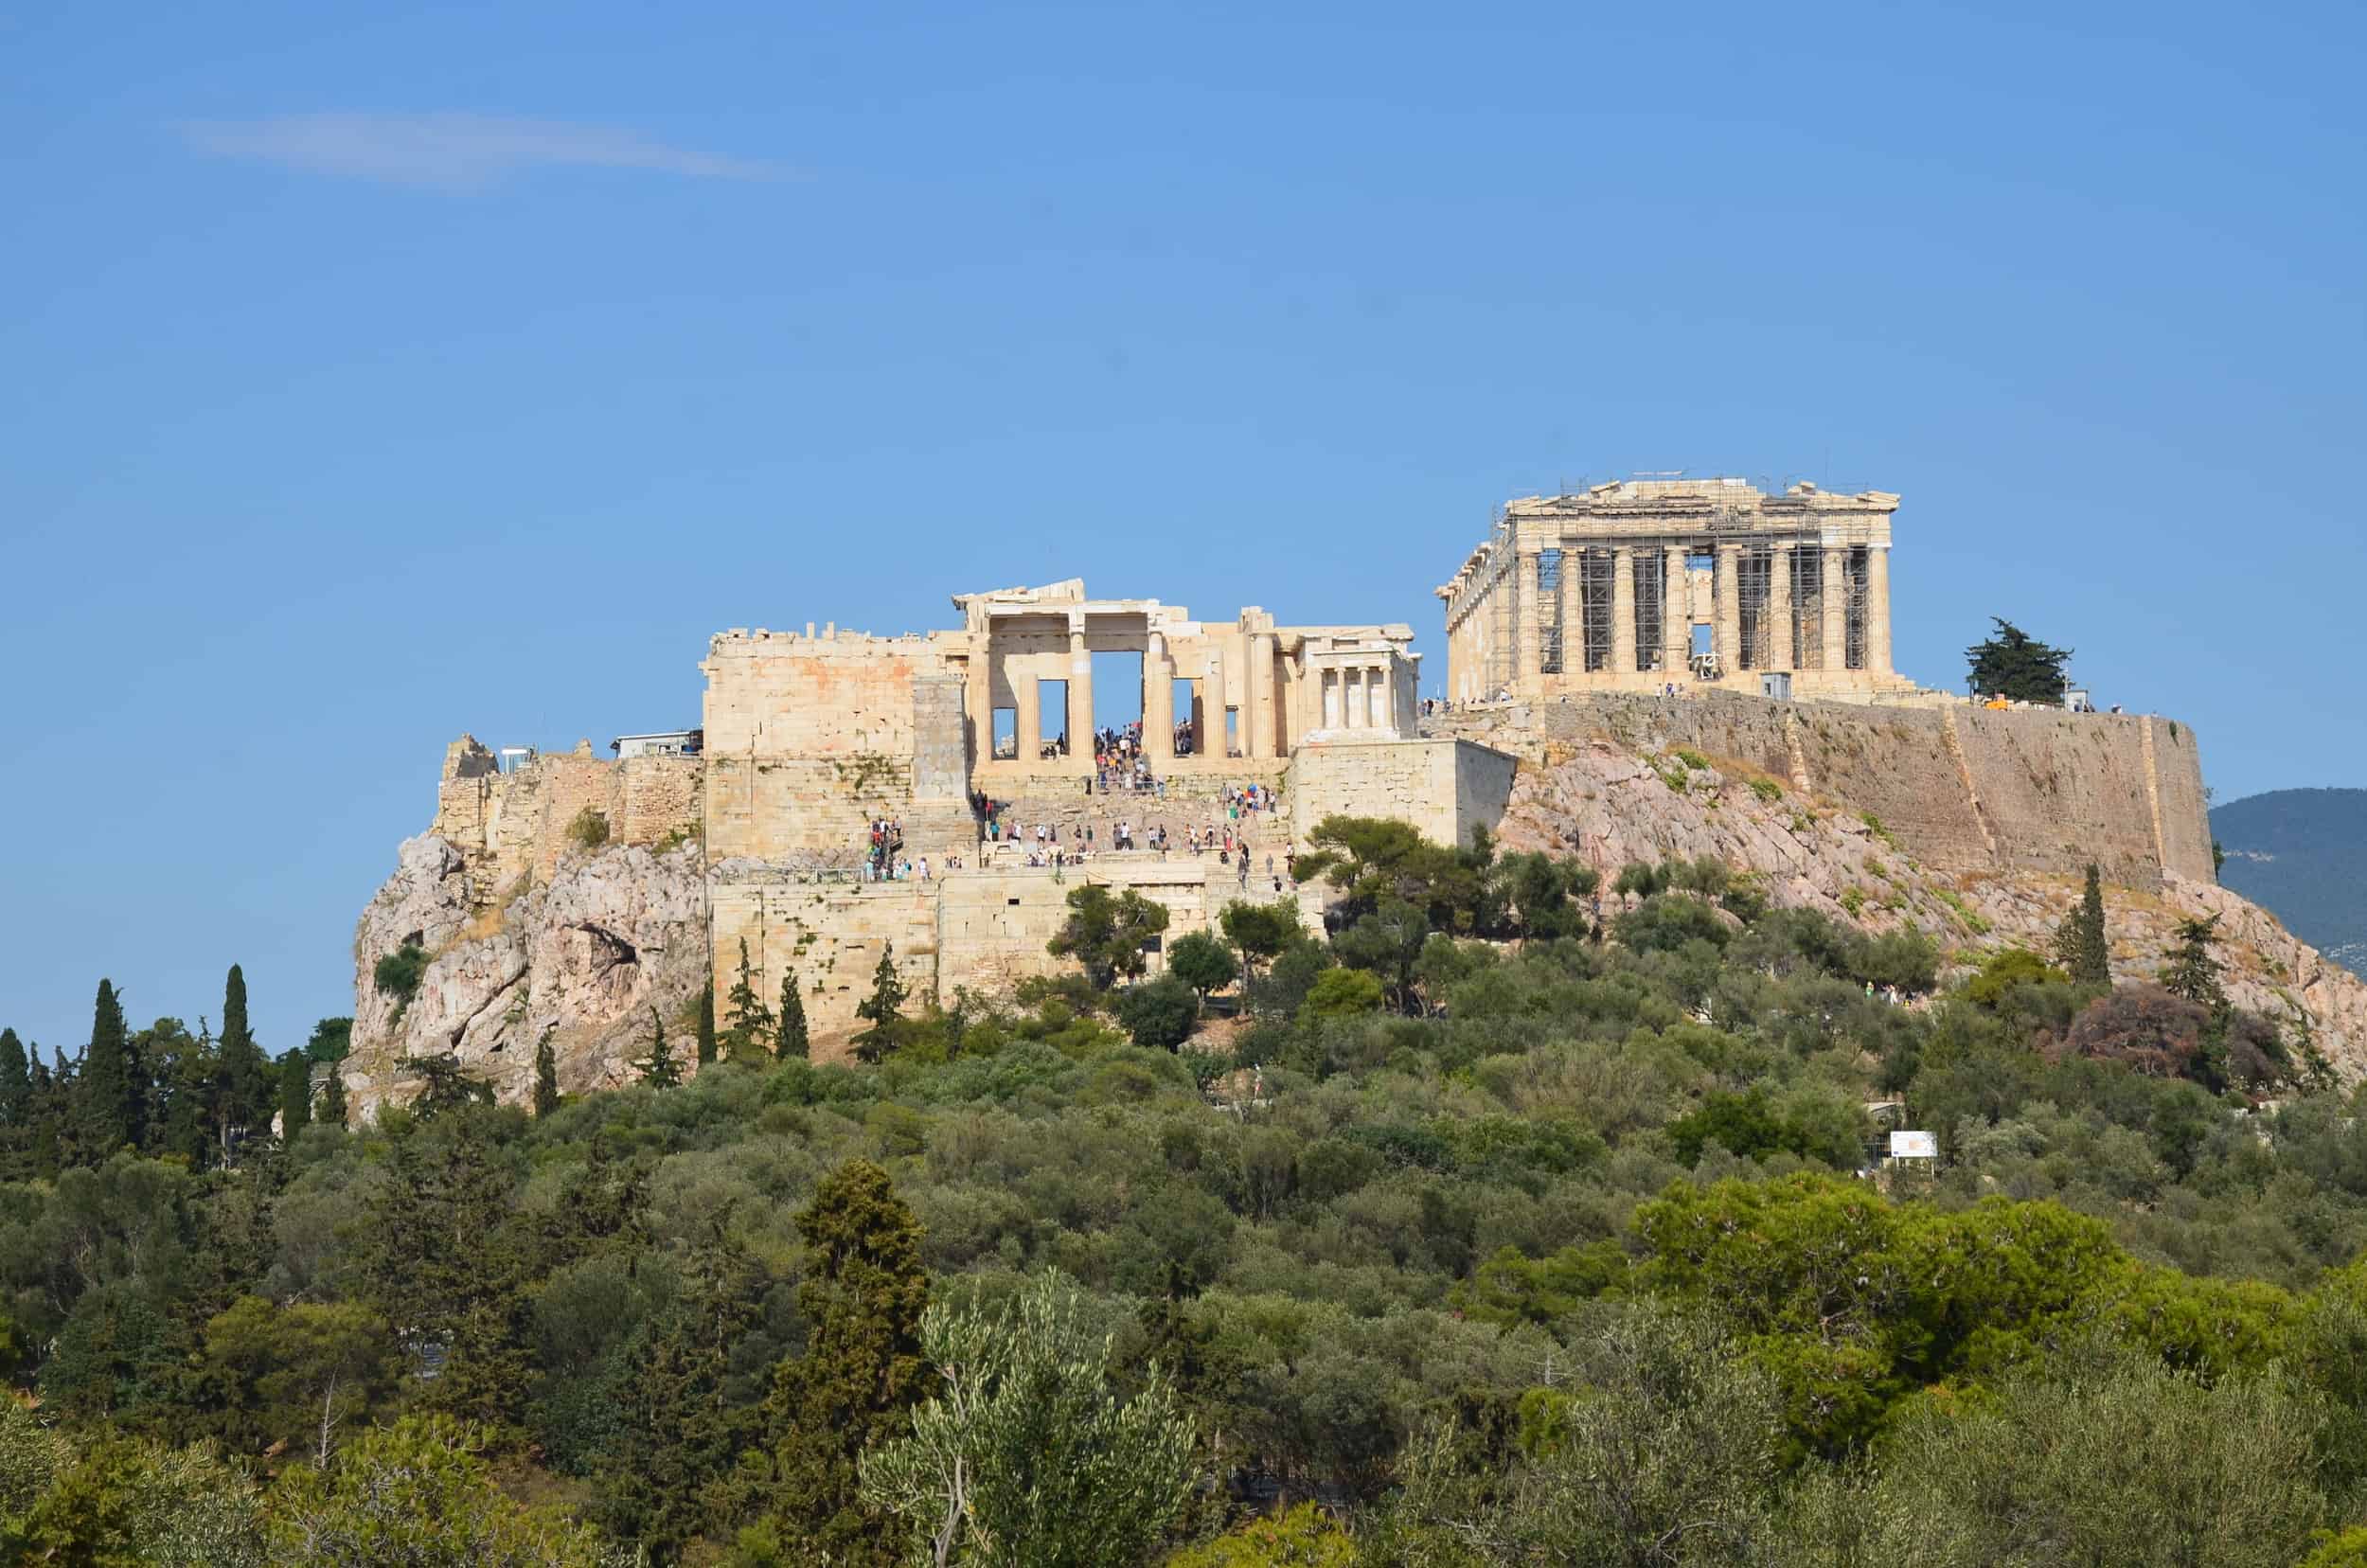 Acropolis from the Pnyx in Athens, Greece